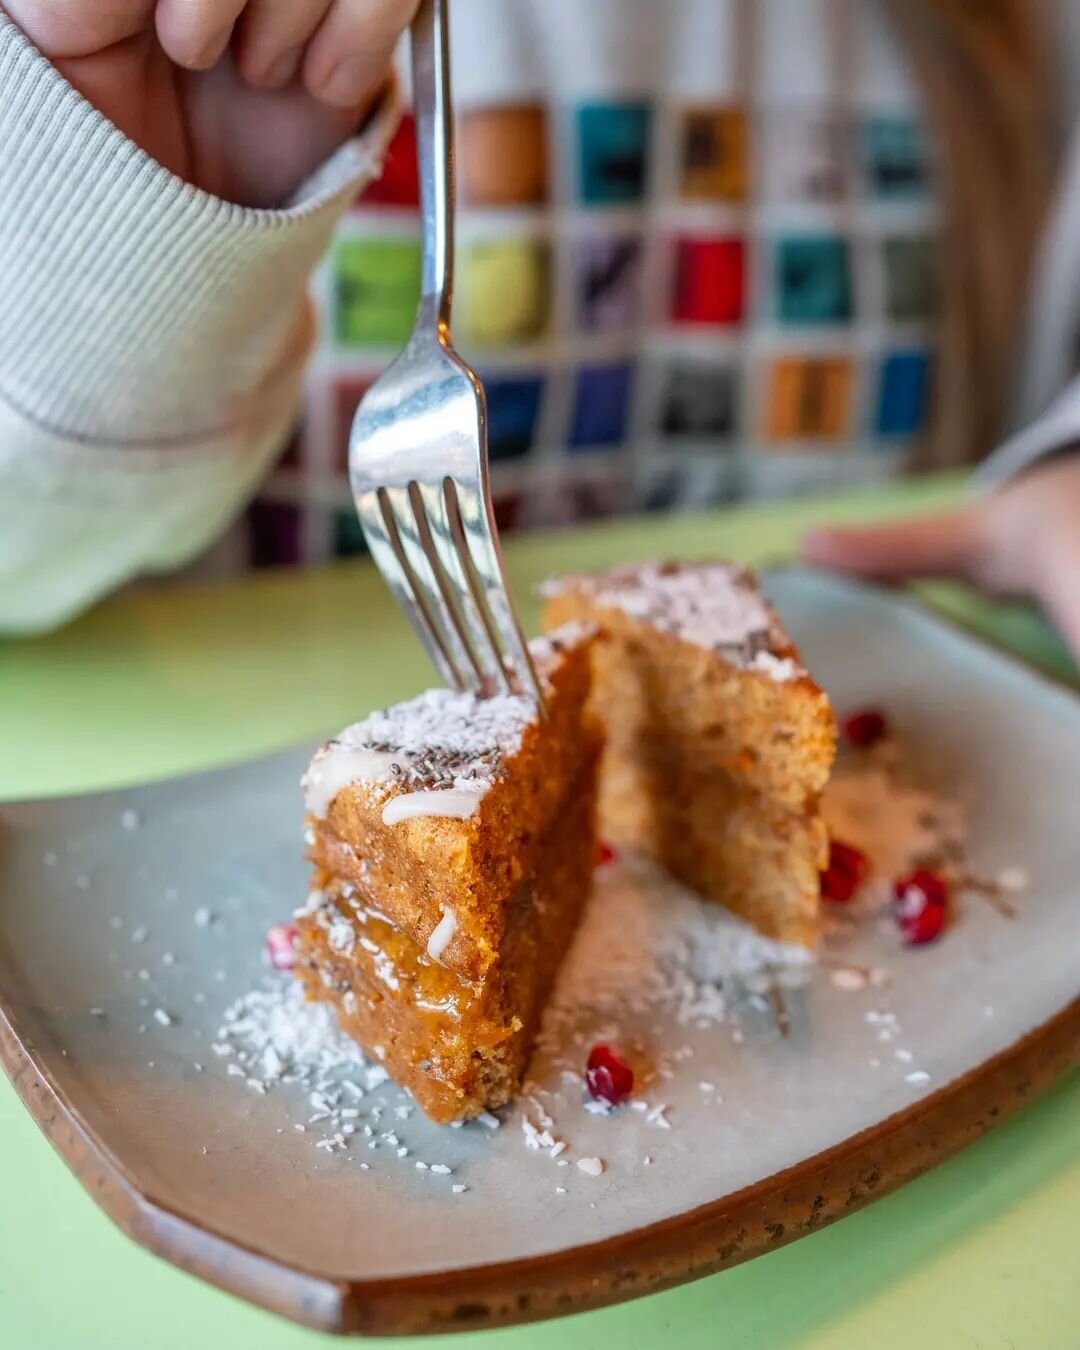 Got a sweet tooth? Don't miss out on our irresistible carrot cake! Dive into a delicious slice and treat yourself to a moment of pure bliss. Life's too short to skip dessert! 🍰✨